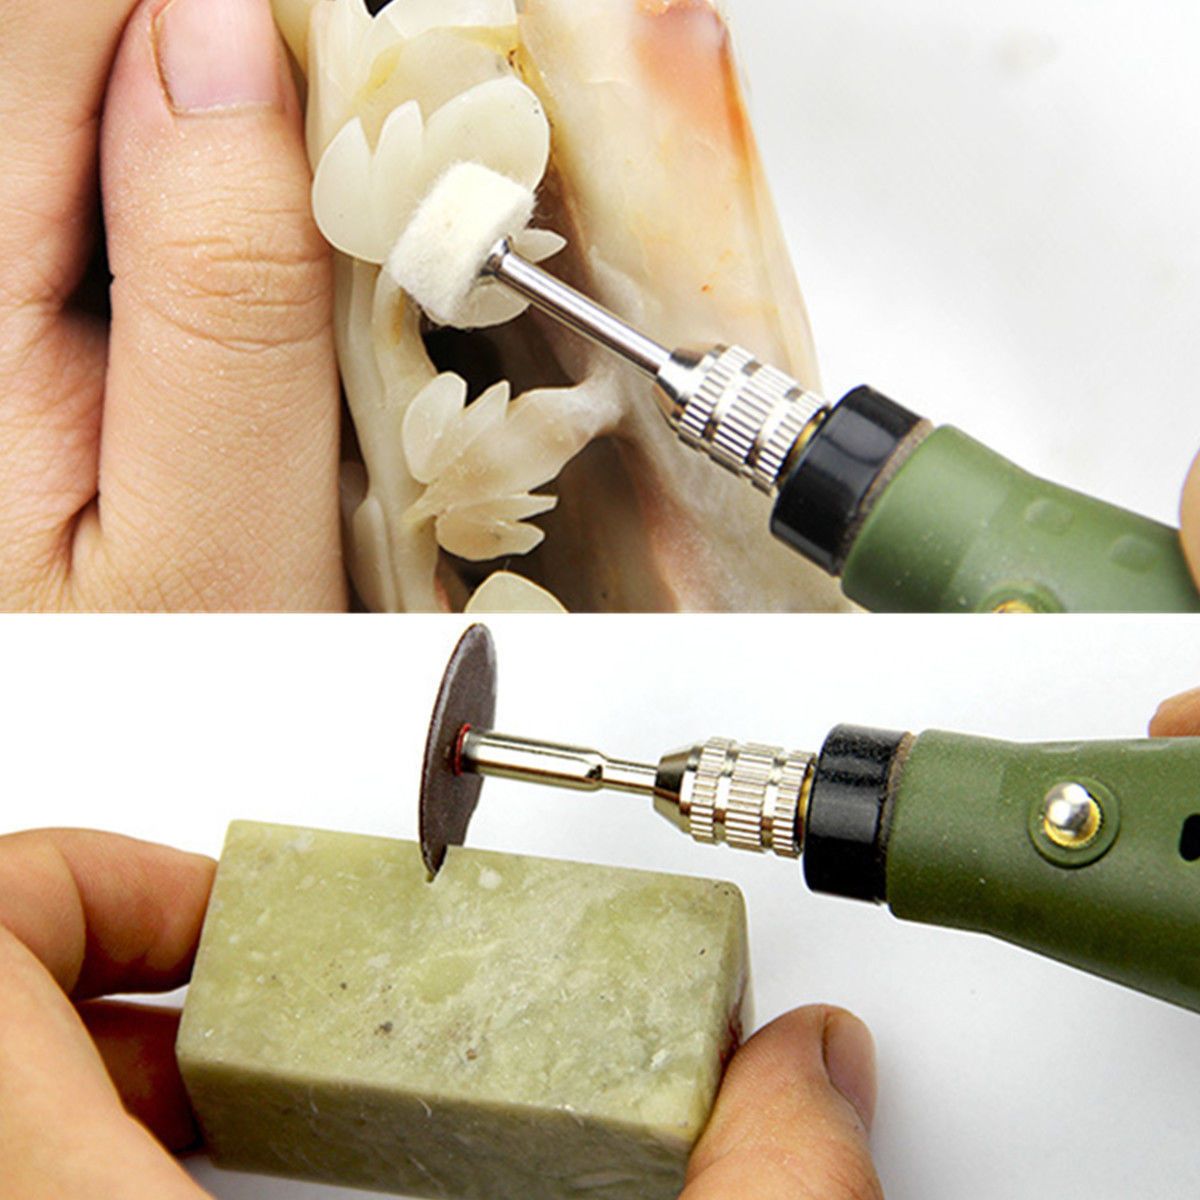 Mini-Engraving-Pen-Electric-Engraver-Carve-Wood-Chisel-Carving-Tools-for-Wood-Glass-Jewelery-Tools-1306878